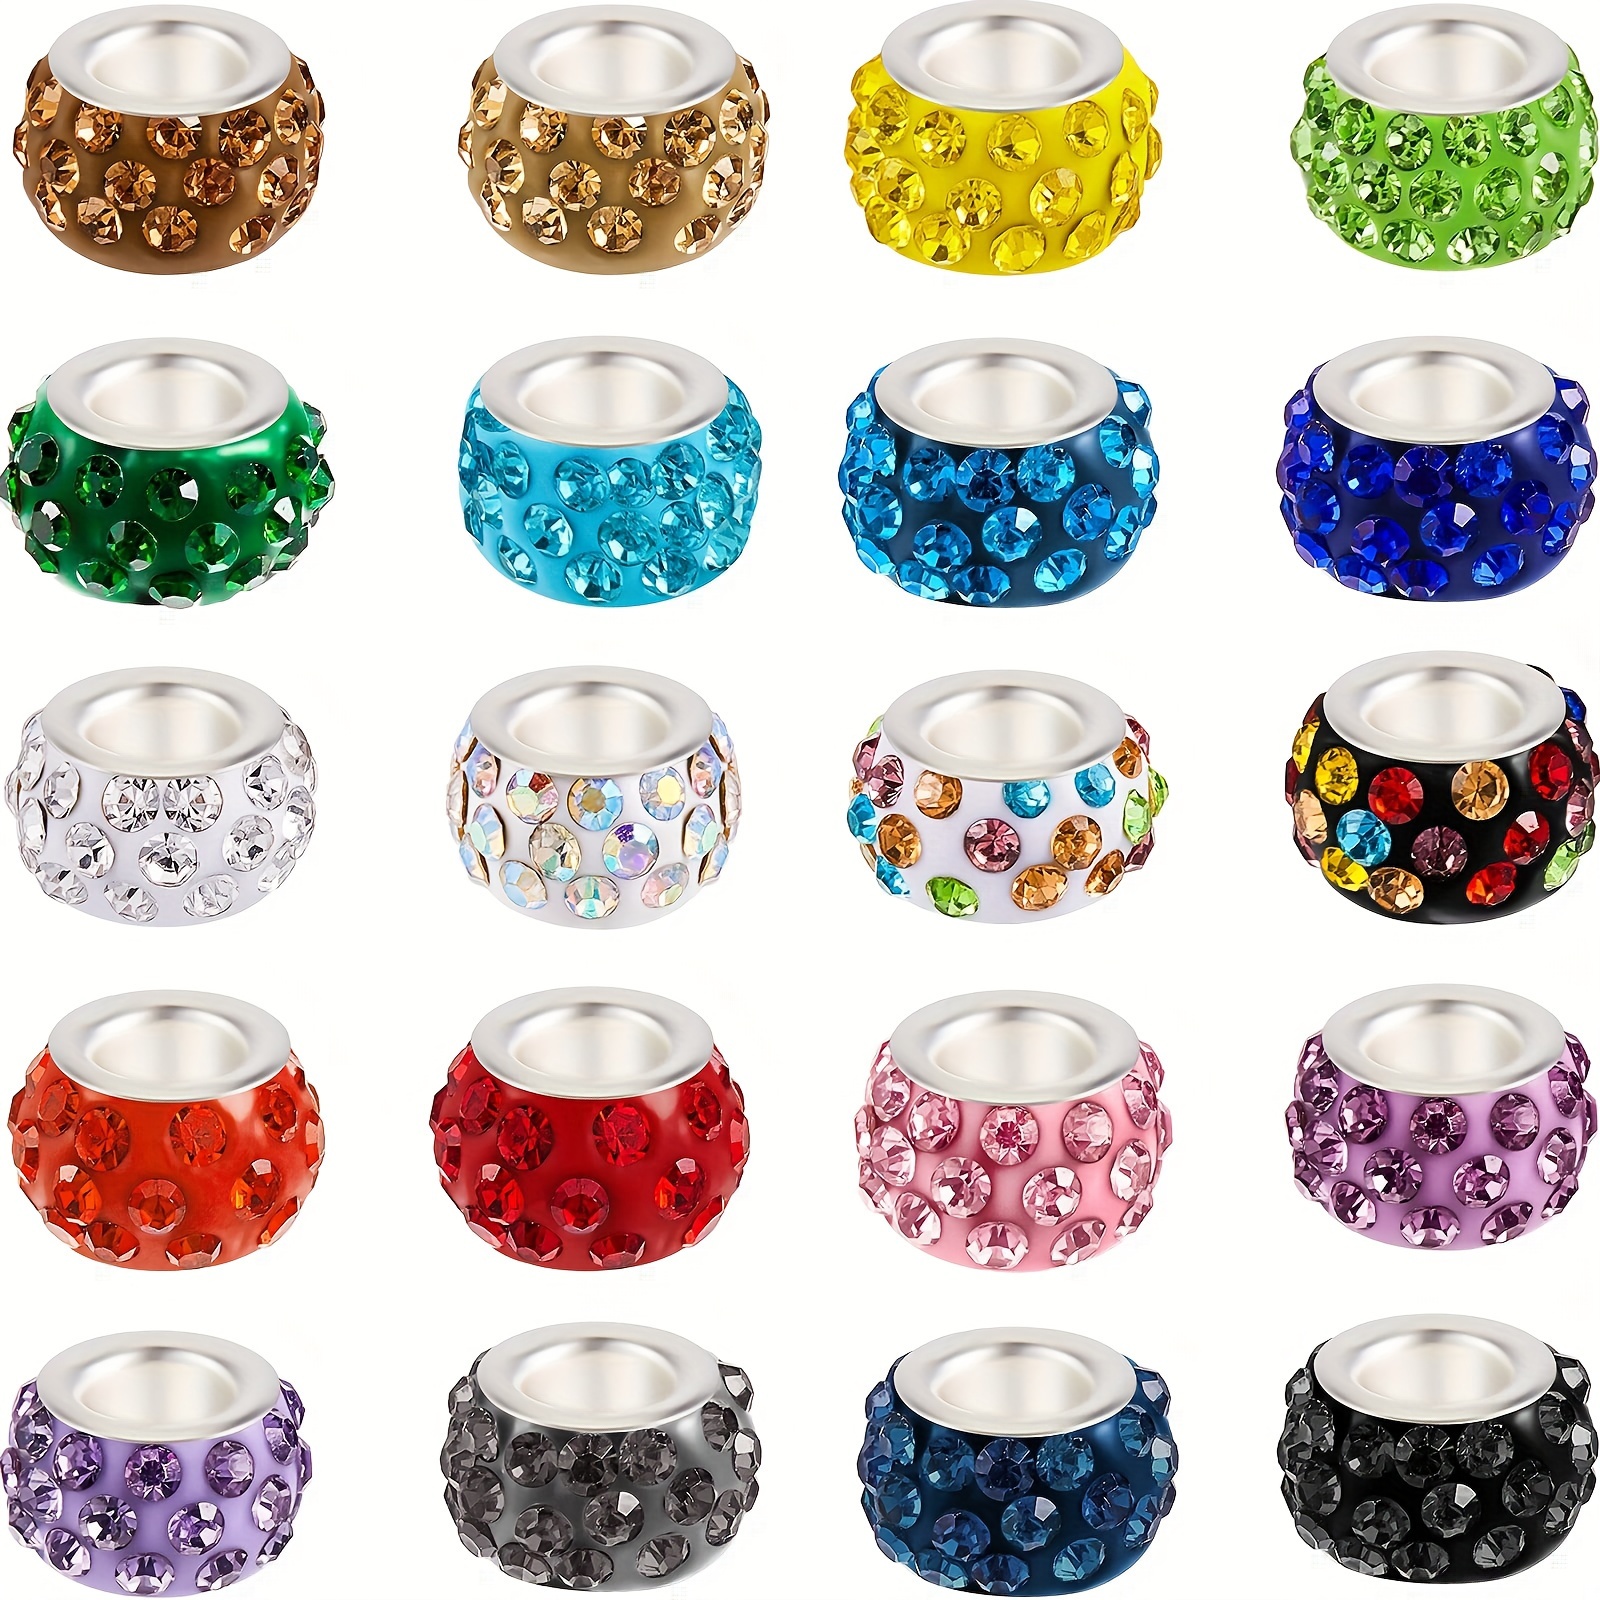 

120 Pieces Of Rhinestones European Beads Crystal Charm Beads With Large Holes Rhinestone Spacer Beads Suitable For Diy Bracelets, Earrings, Necklaces, Craft Production Supplies, 20 Colors